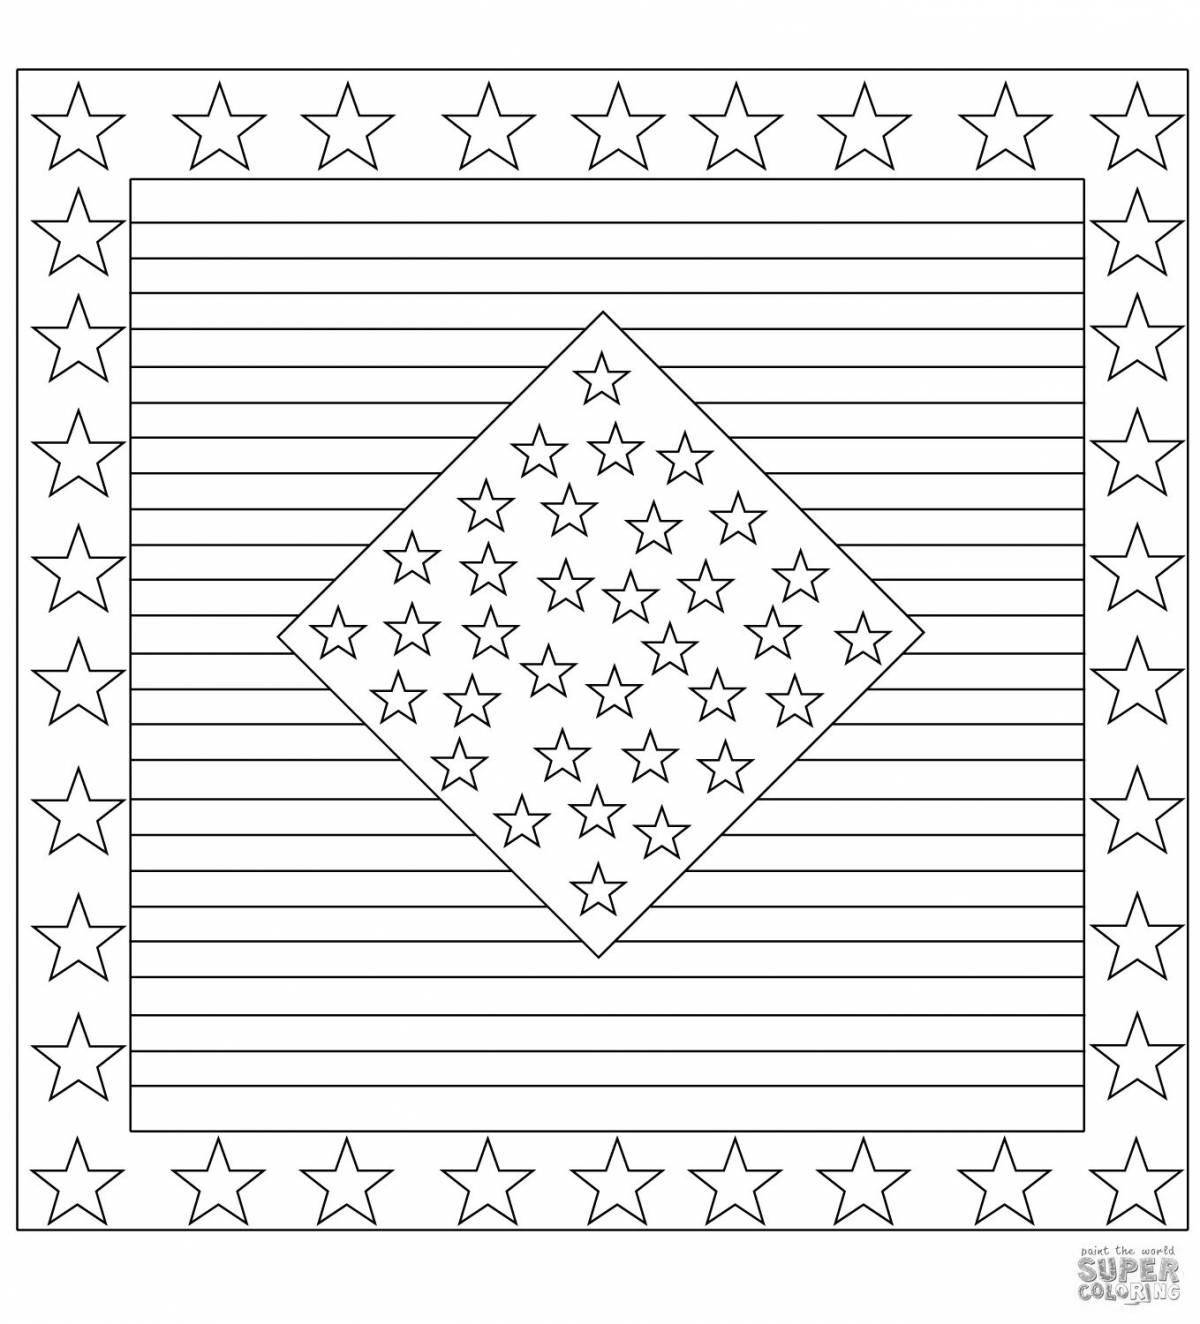 Colorful mat for coloring for children